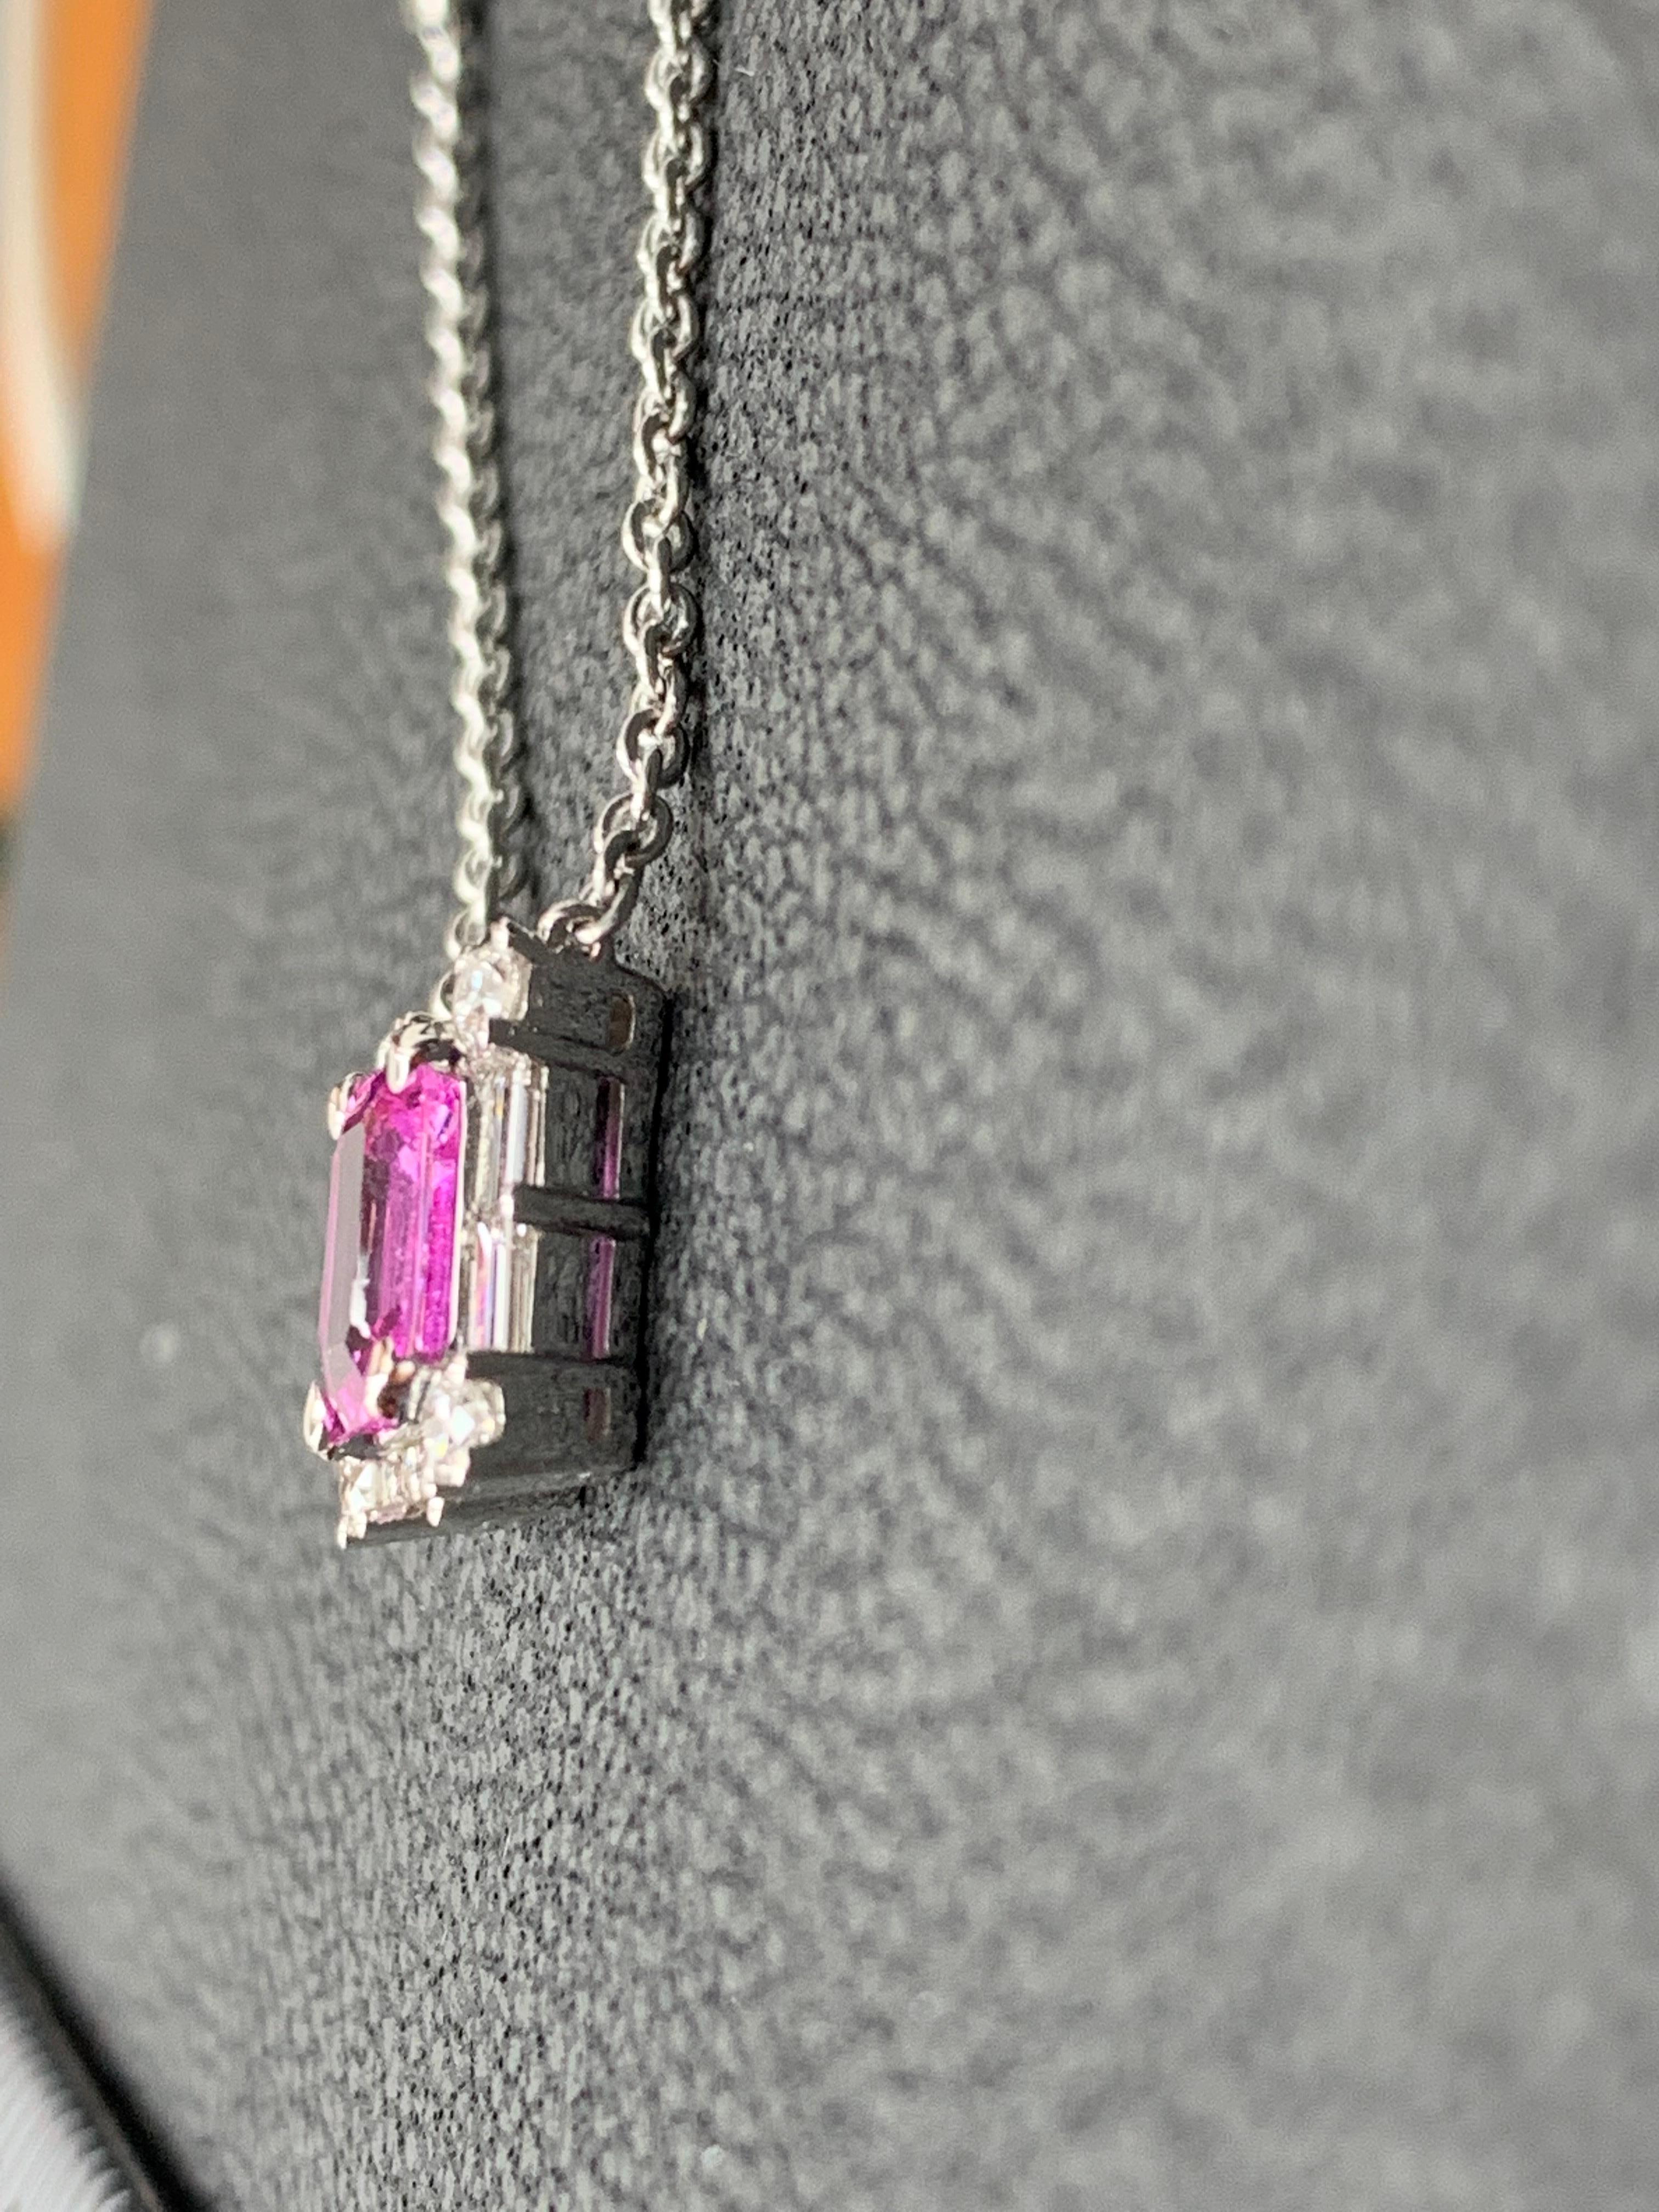 0.96 Carat Emerald Cut Pink Sapphire Diamond Pendant Necklace in 18K White Gold For Sale 1